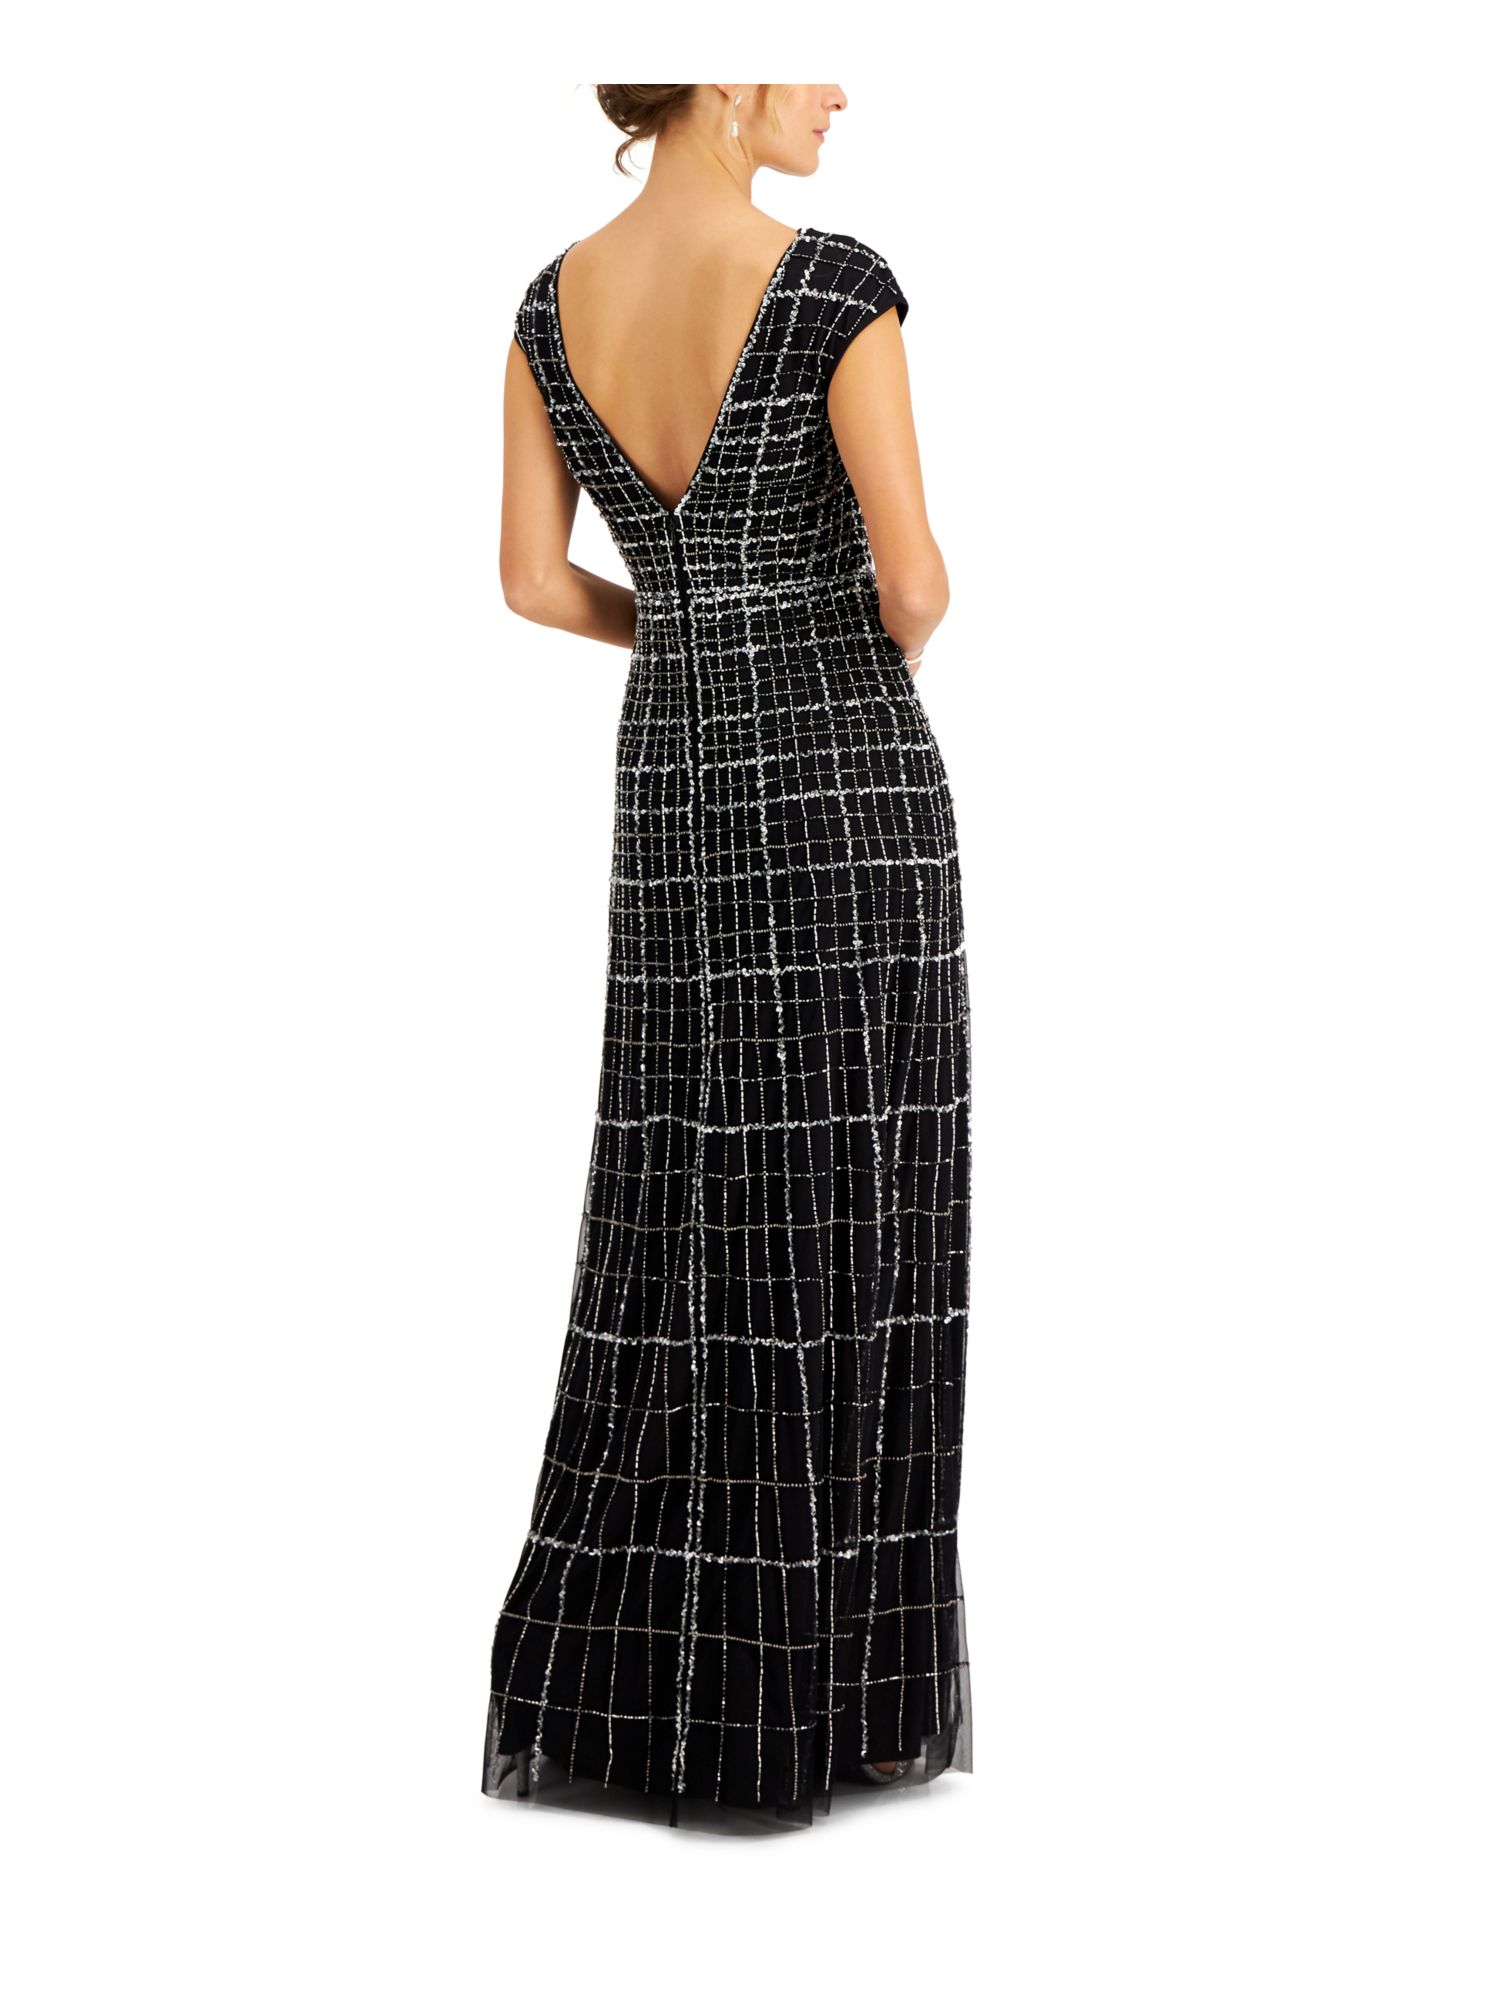 ADRIANNA PAPELL Womens Black Embellished Zippered Plaid Cap Sleeve V Neck Full-Length Evening Gown Dress 2